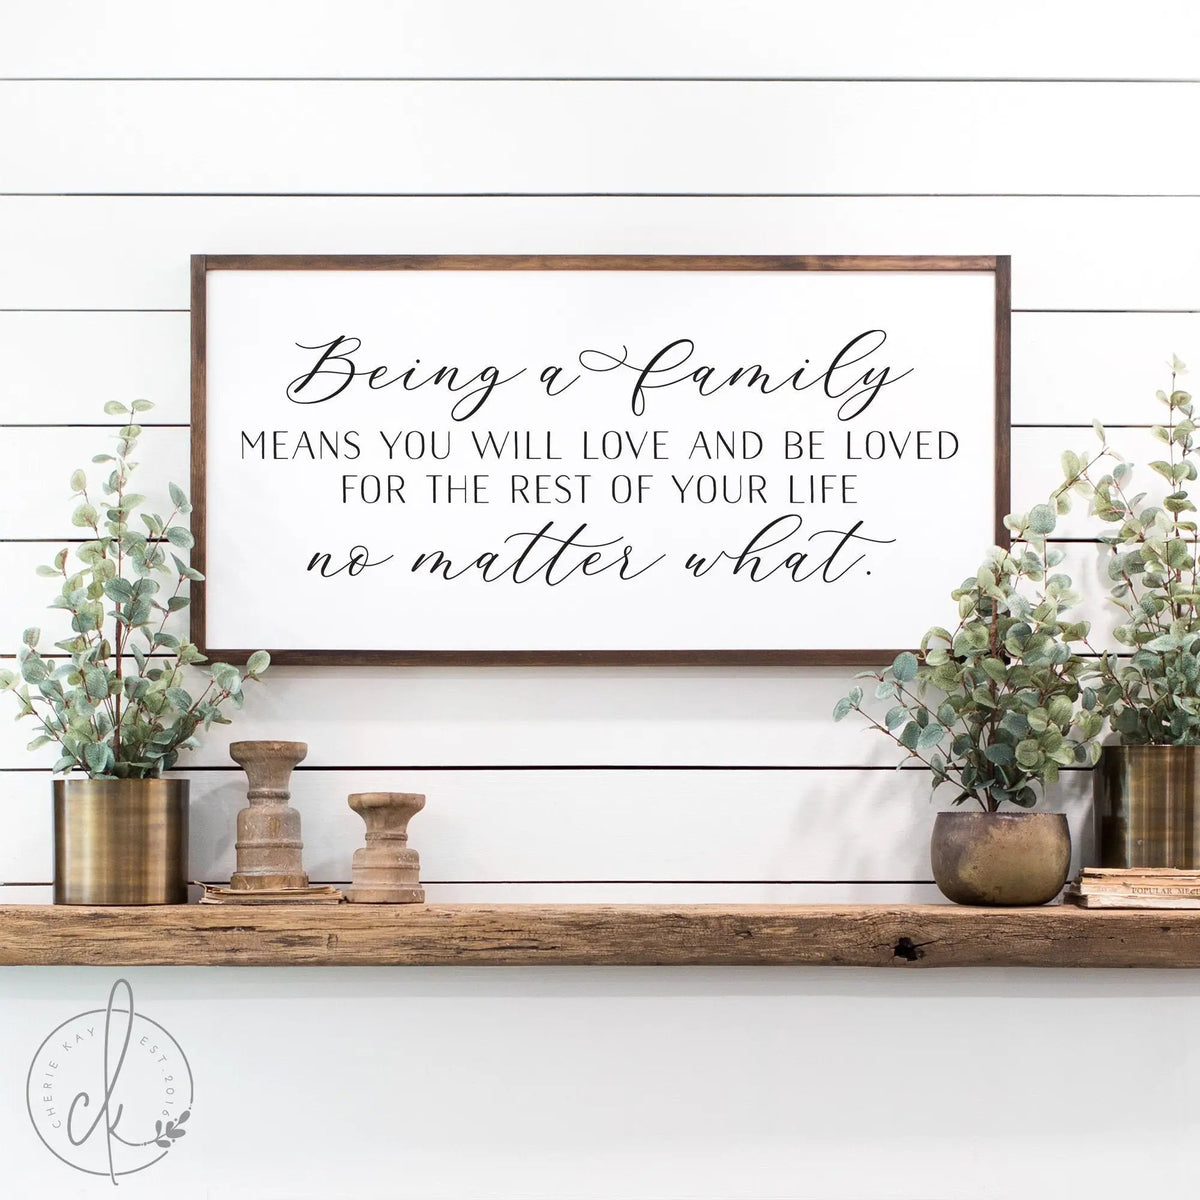 family sign | Being a family means sign | living room wall decor | sign for living room | family wood sign